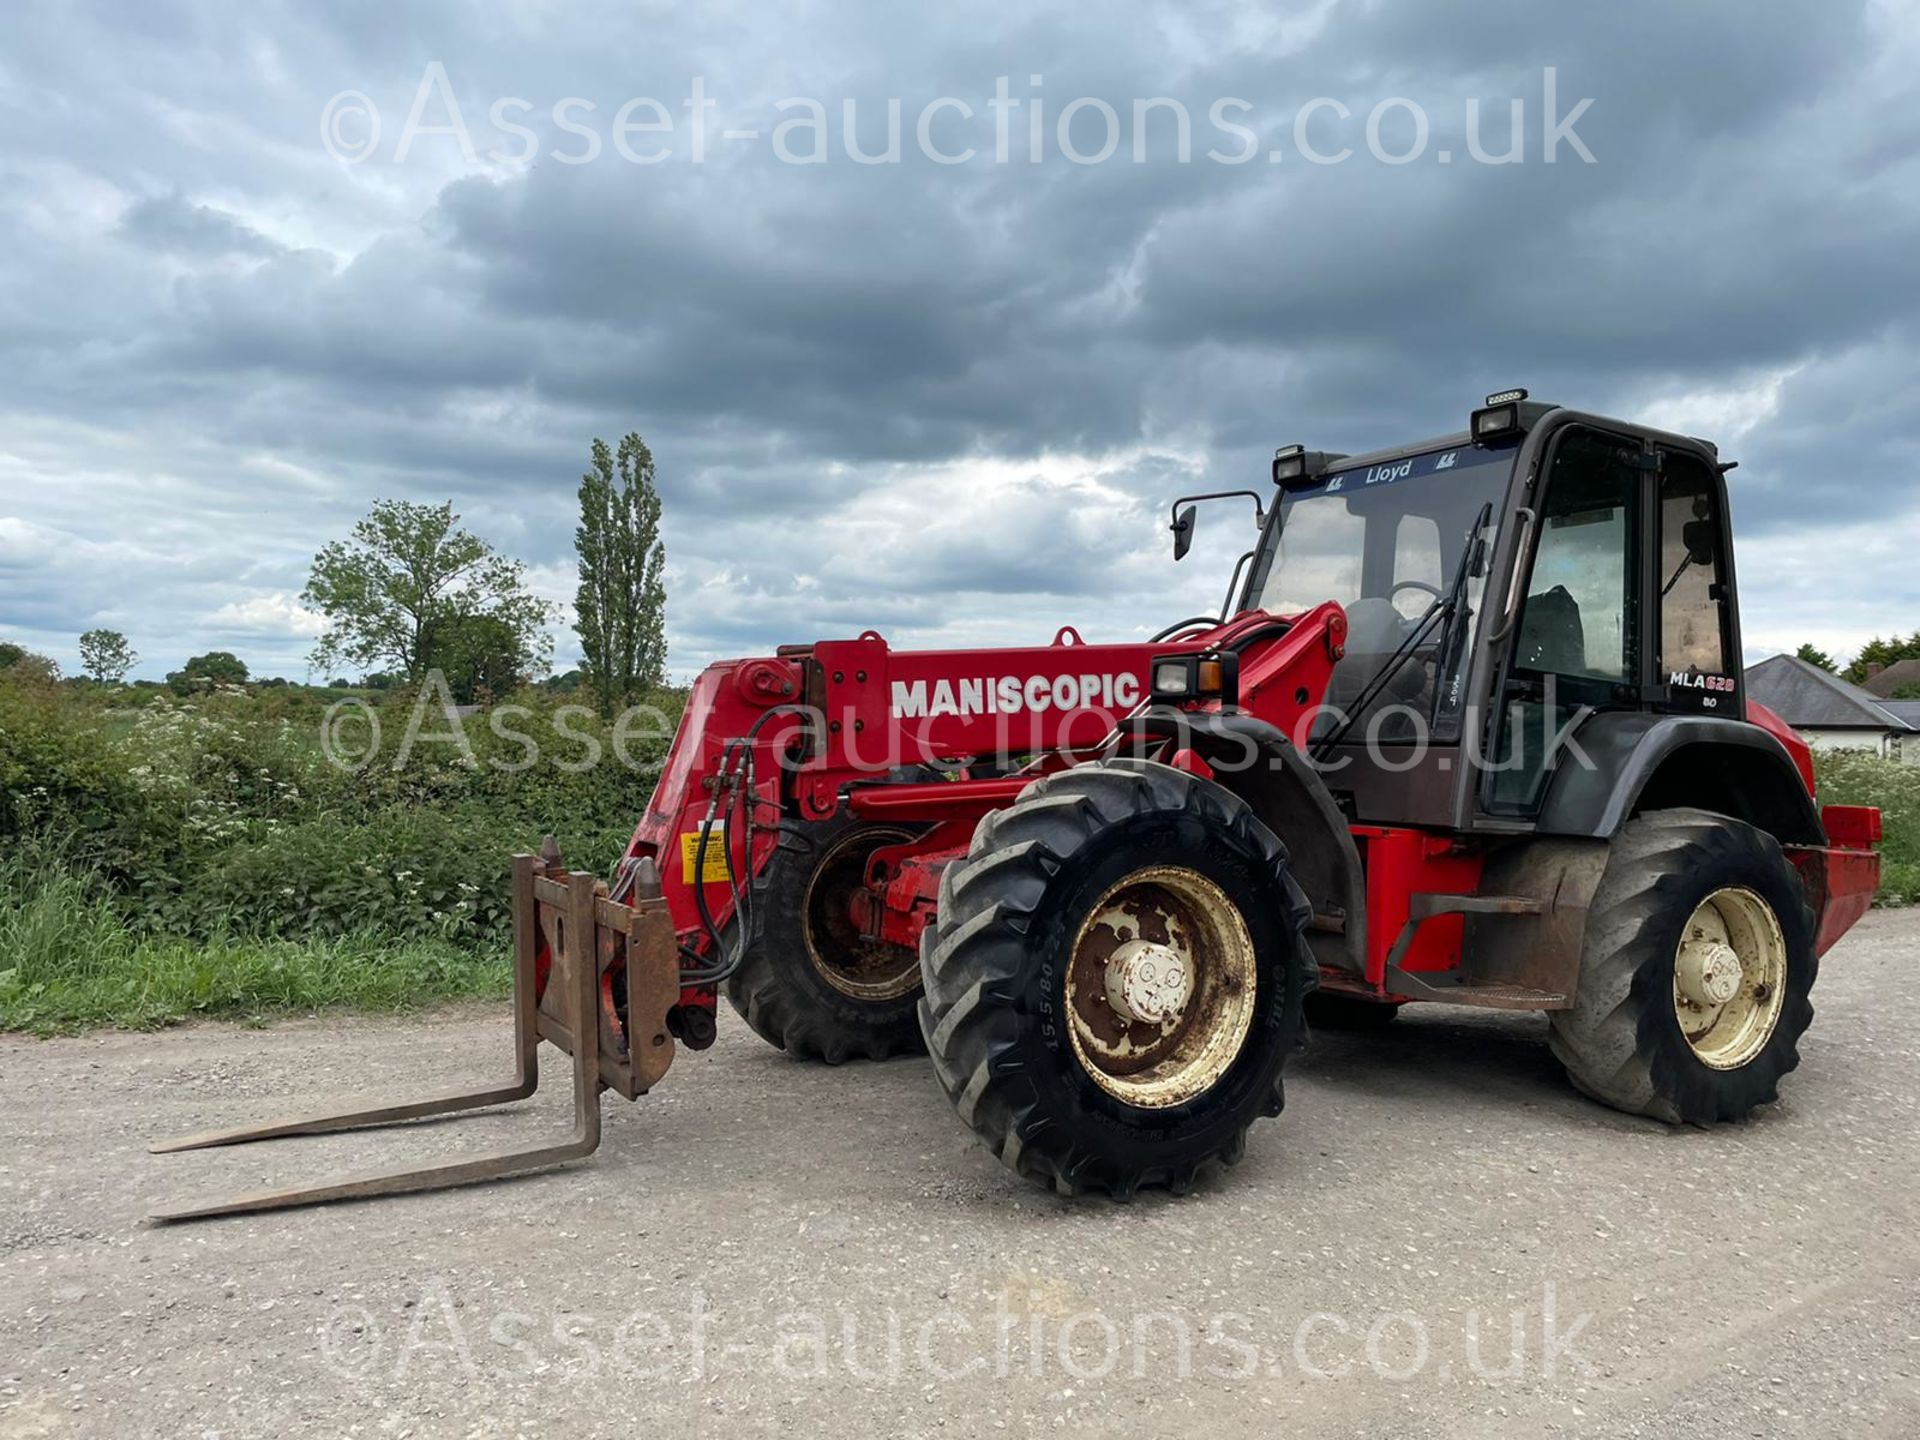 2000 MANITOU MLA 628 ARTICULATED TELESCOPIC TELEHANDLER, RUNS DRIVES AND LIFTS *PLUS VAT* - Image 5 of 26